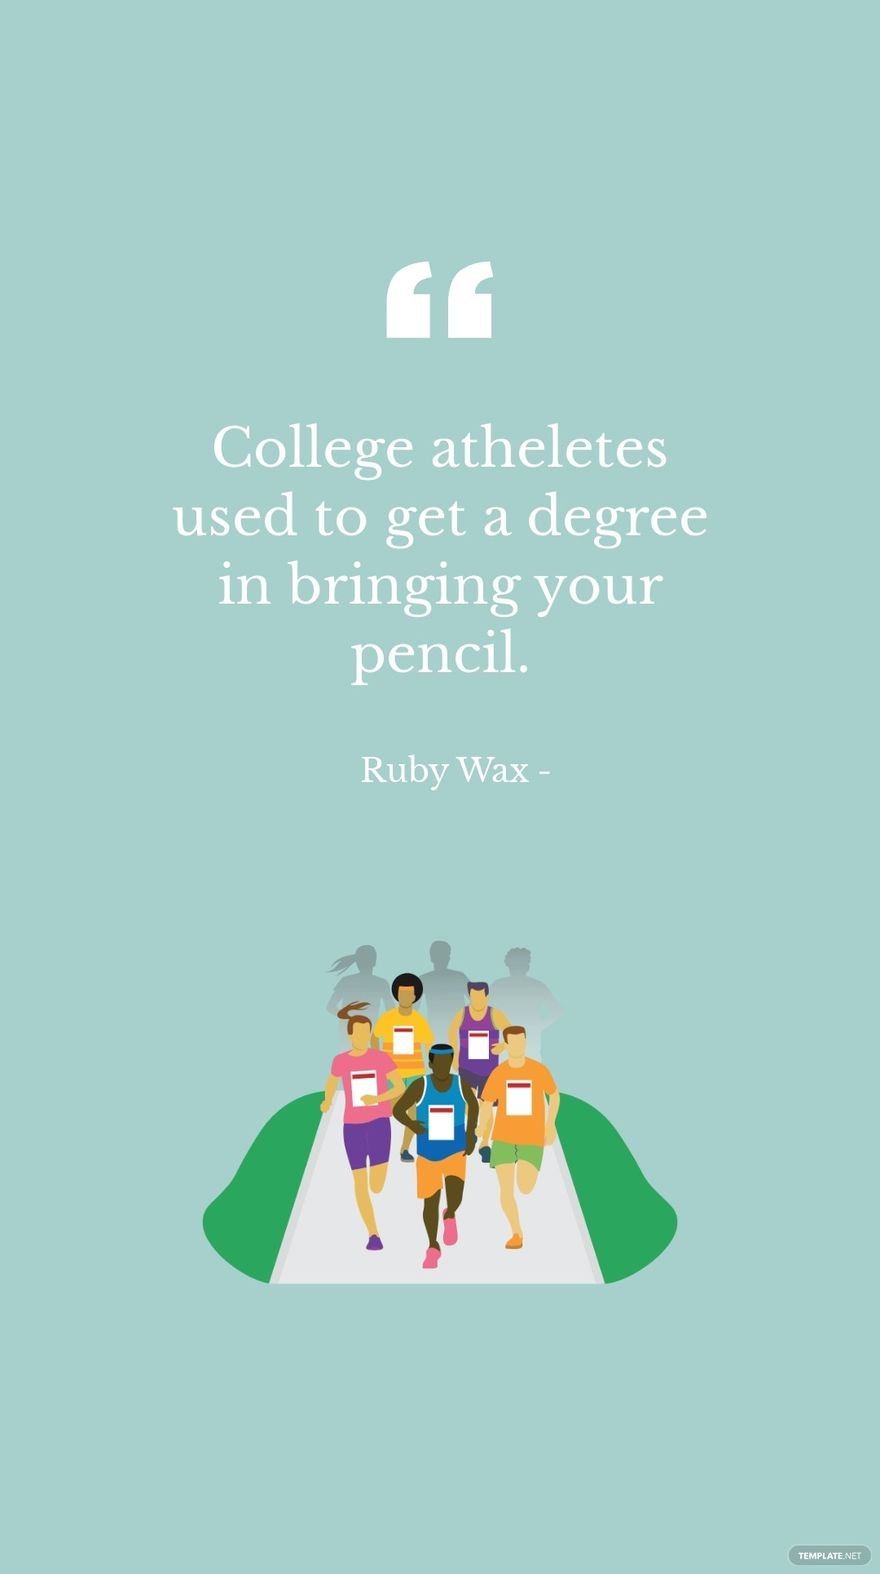 Free Ruby Wax - College atheletes used to get a degree in bringing your pencil. in JPG